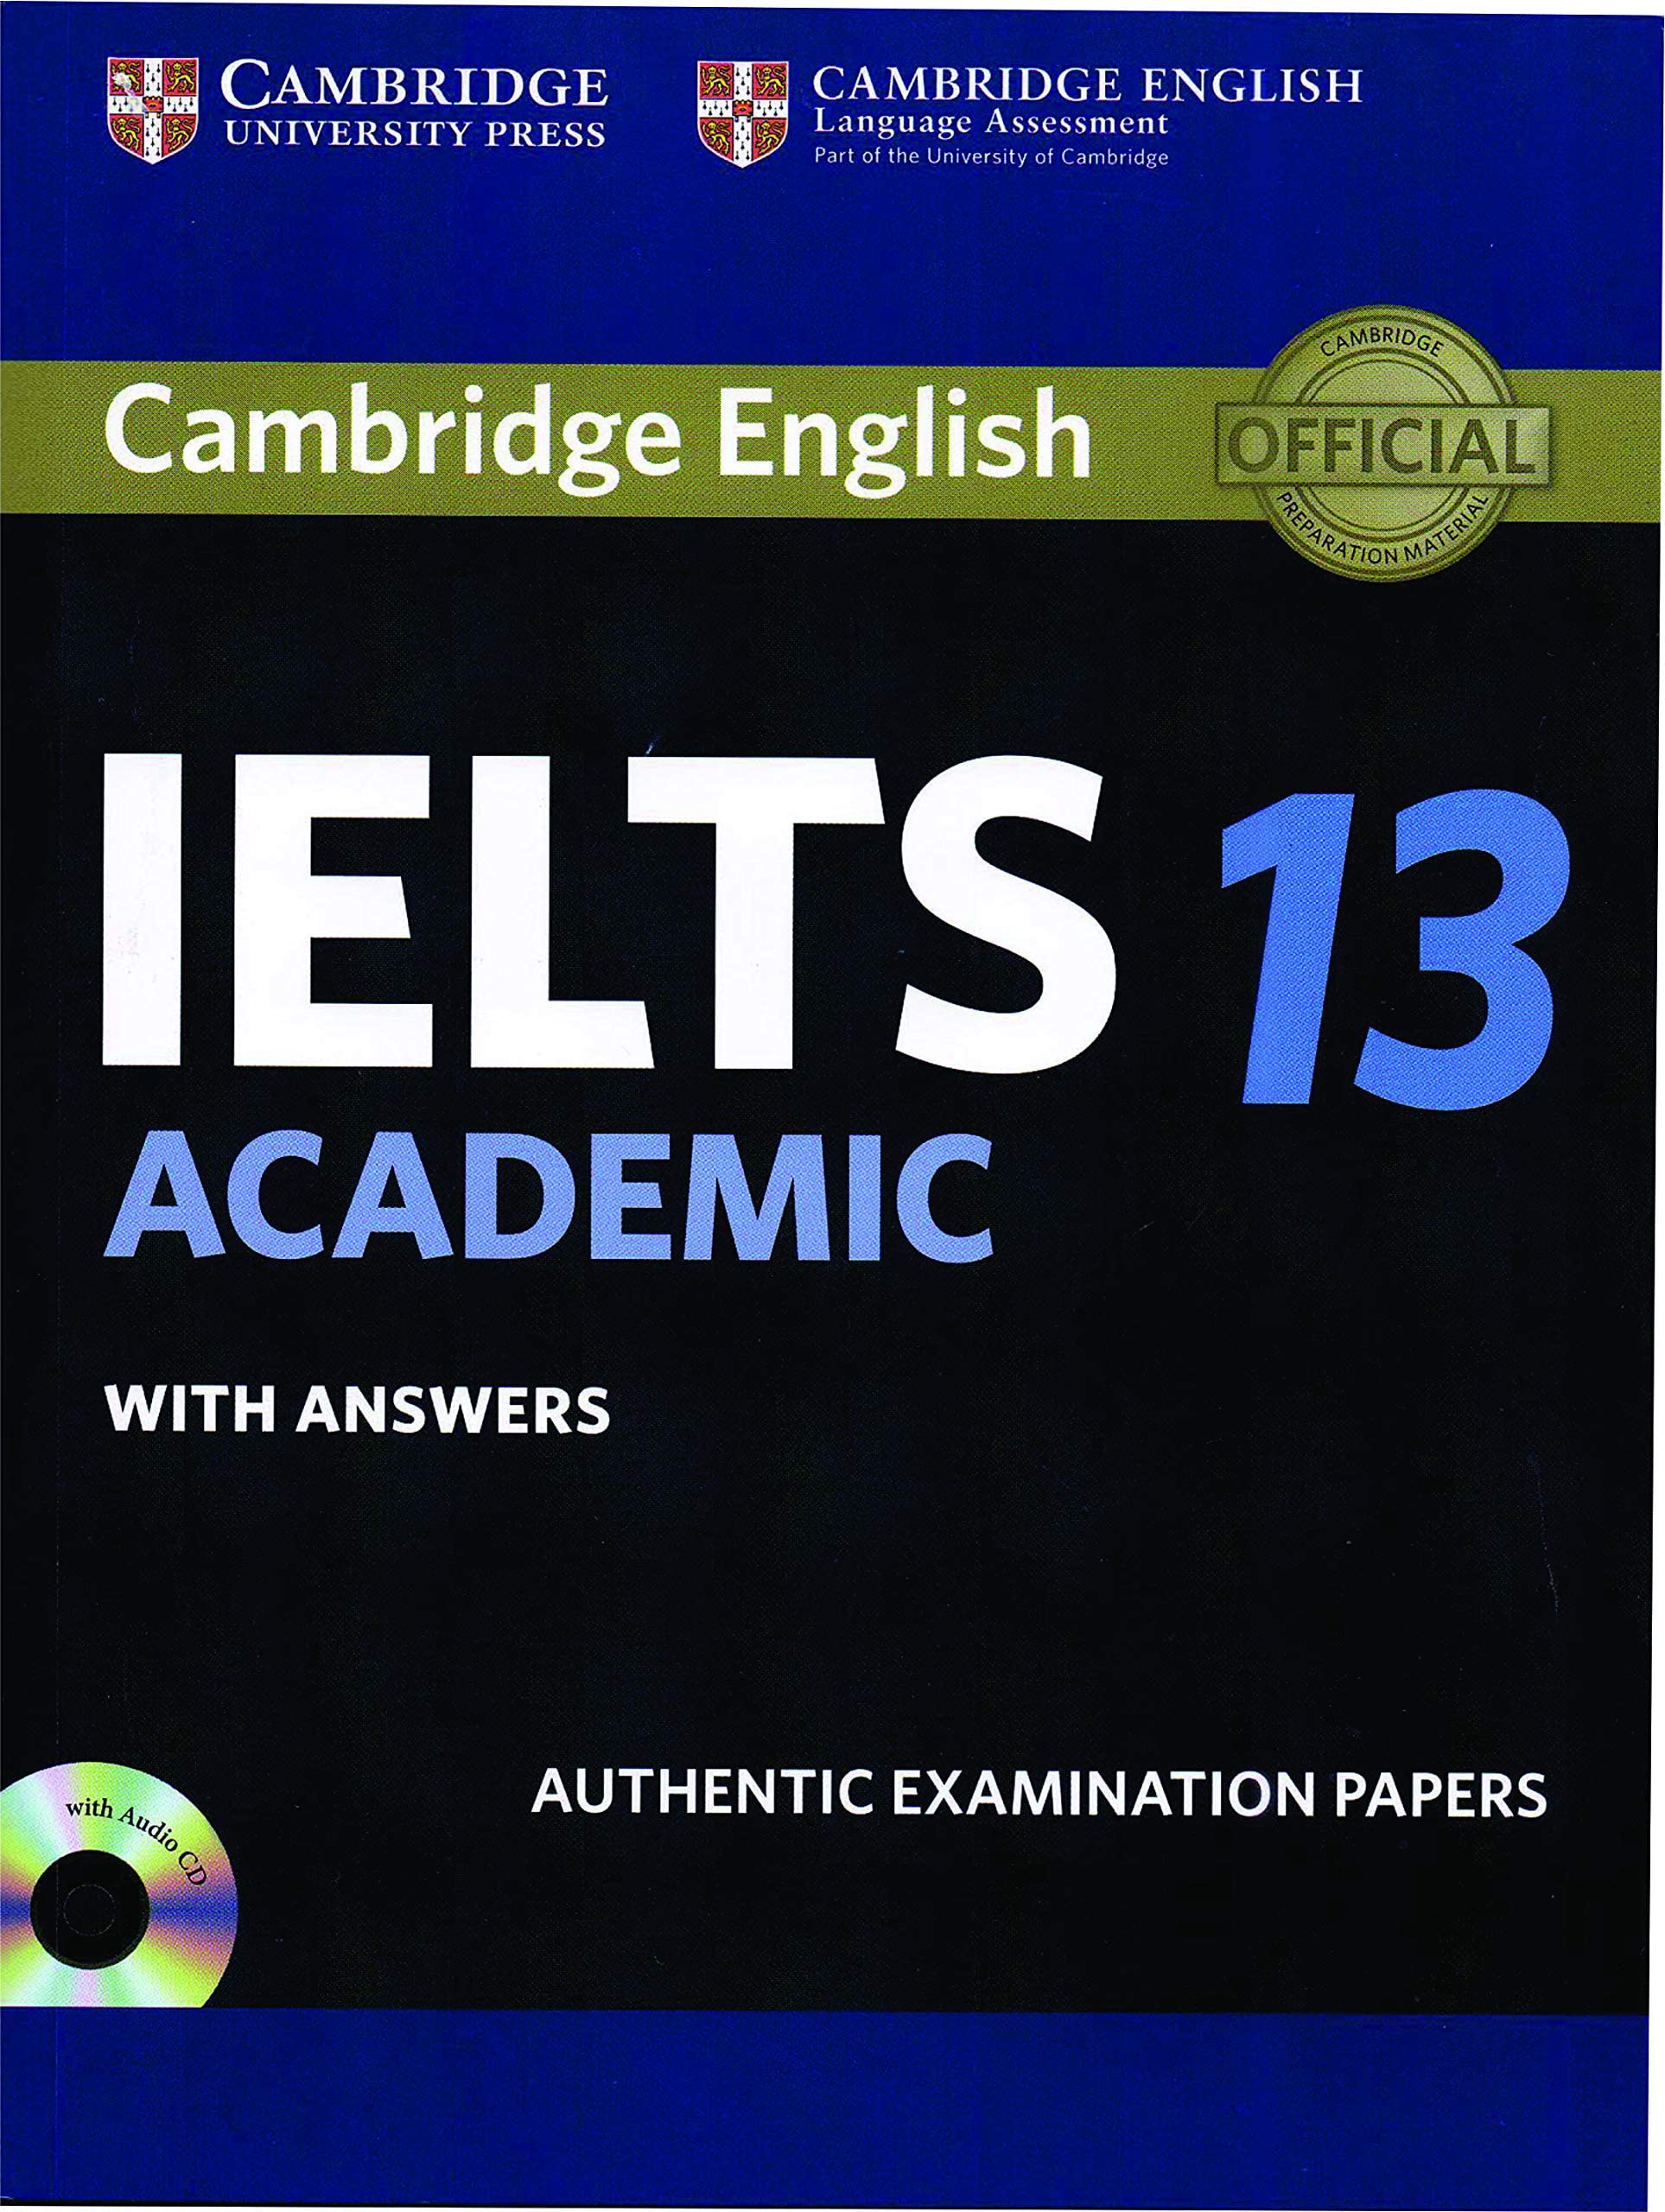 with　Student's　with　Asian　(South　Book　Cambridge　Audio　Answers　IELTS　Academic　13　edition)|+|+